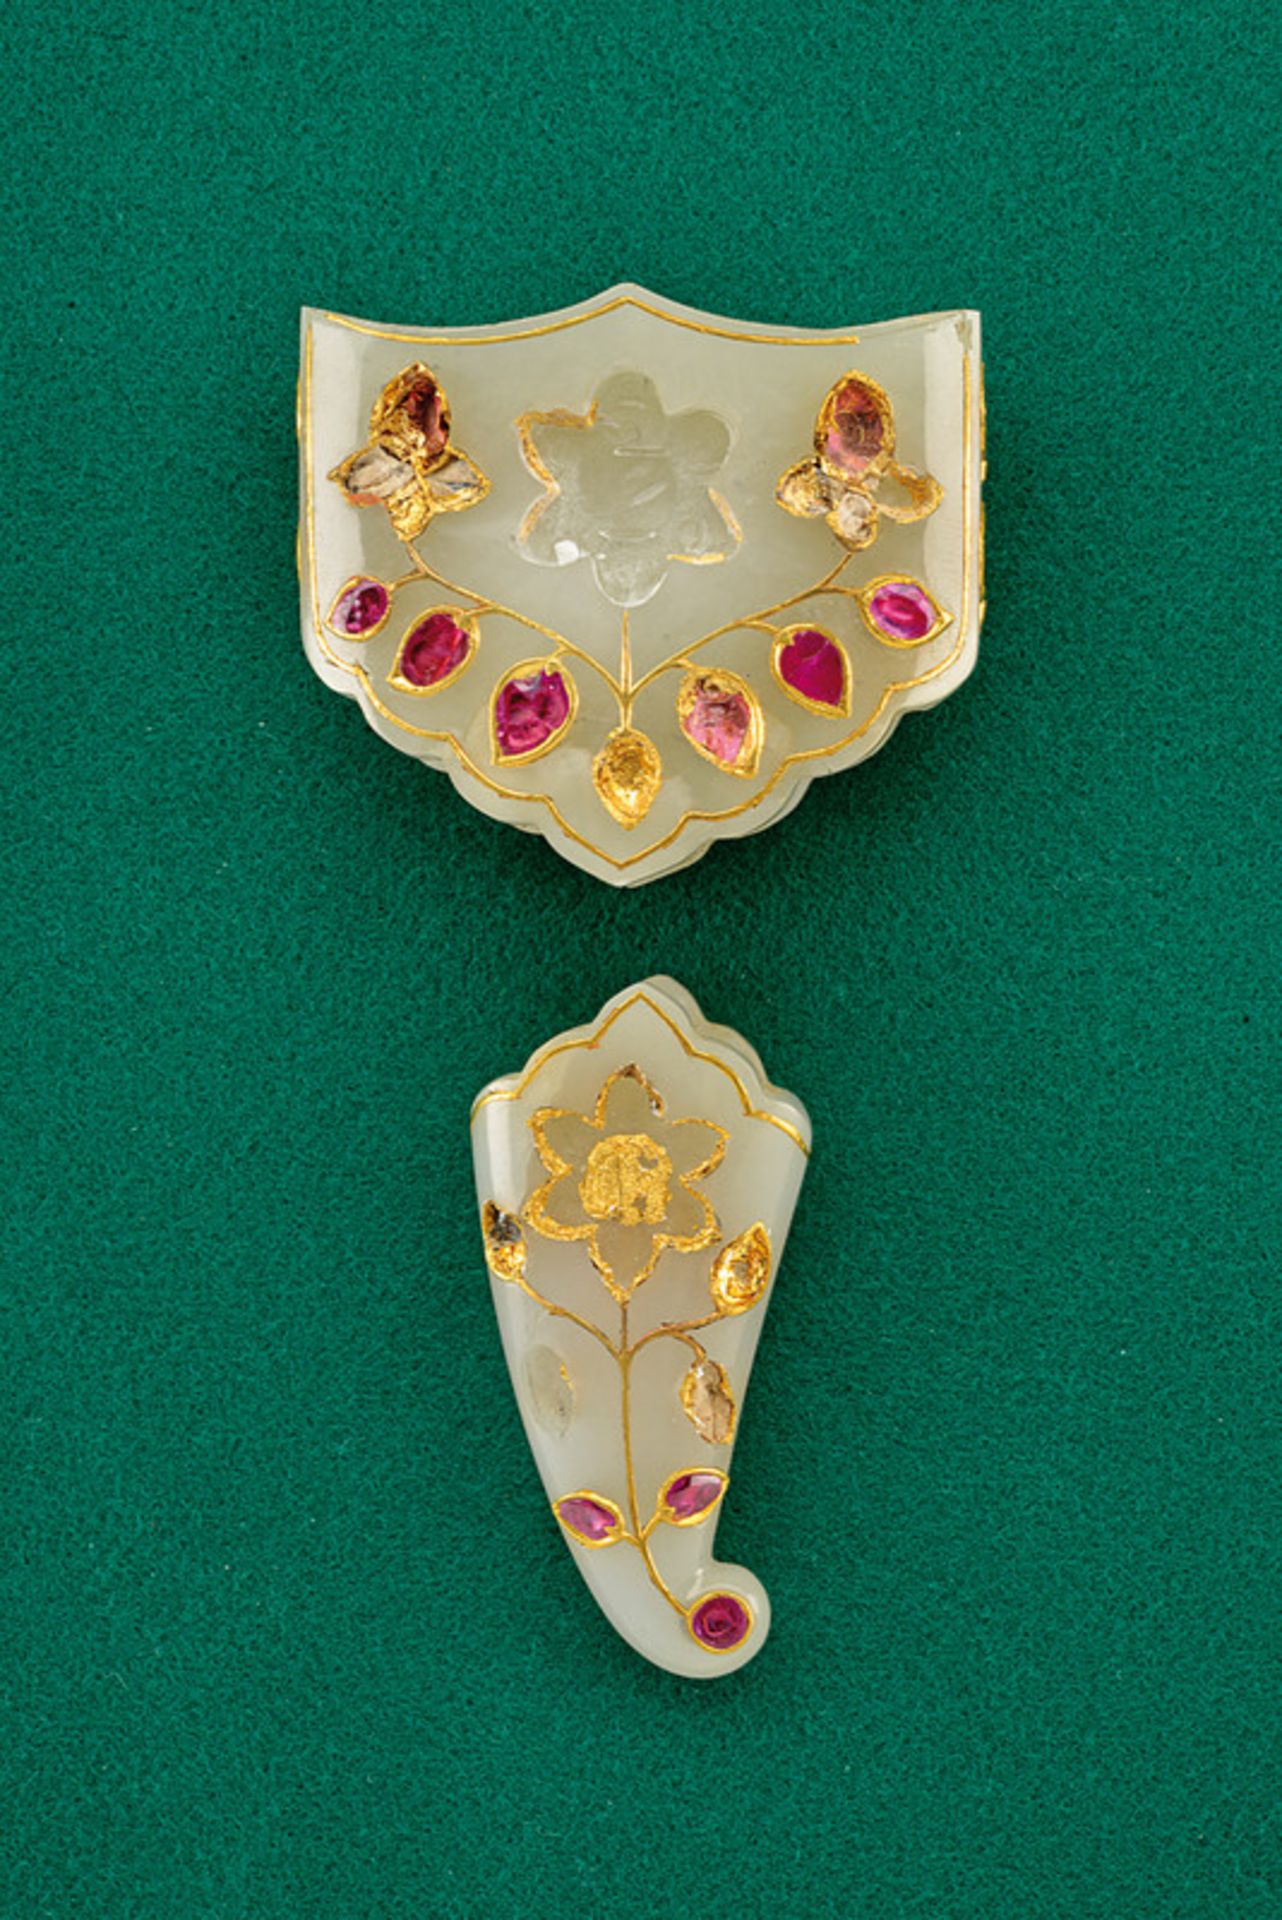 Jade grip and scabbard garniture of a Moghul kandshar, featuring gold and rubies - Image 8 of 14